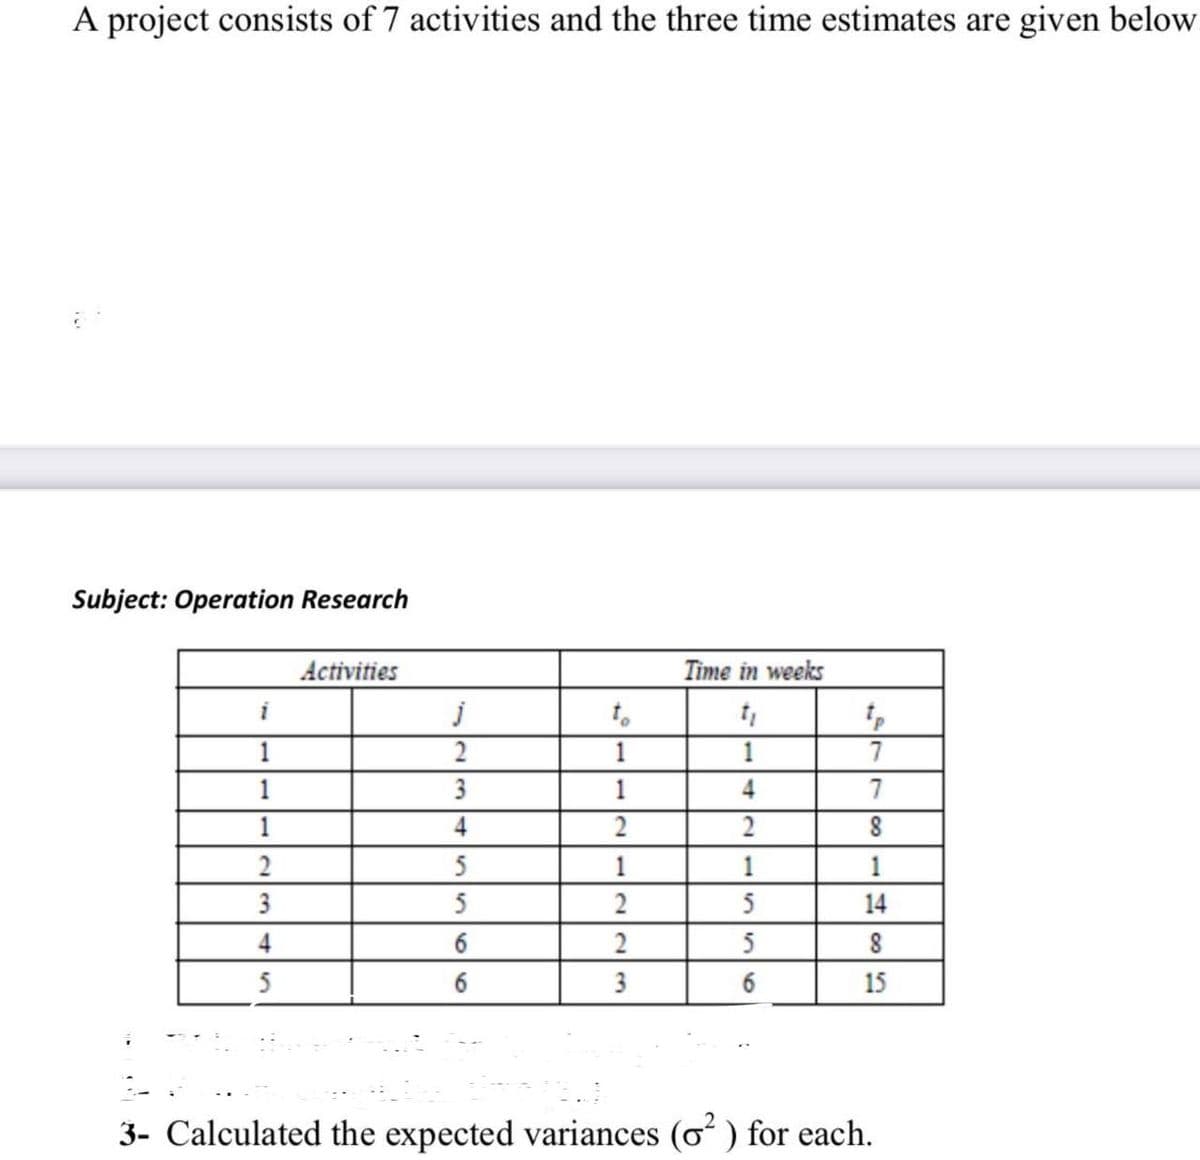 A project consists of 7 activities and the three time estimates are given below
Subject: Operation Research
Activities
Time in weeks
i
to
1
2
1
1
7
1
3
1
4
7
1
4
2
2
5
1
1
1
3
5
2
5
14
4
5
8
5
3
6
15
3- Calculated the expected variances (o) for each.
